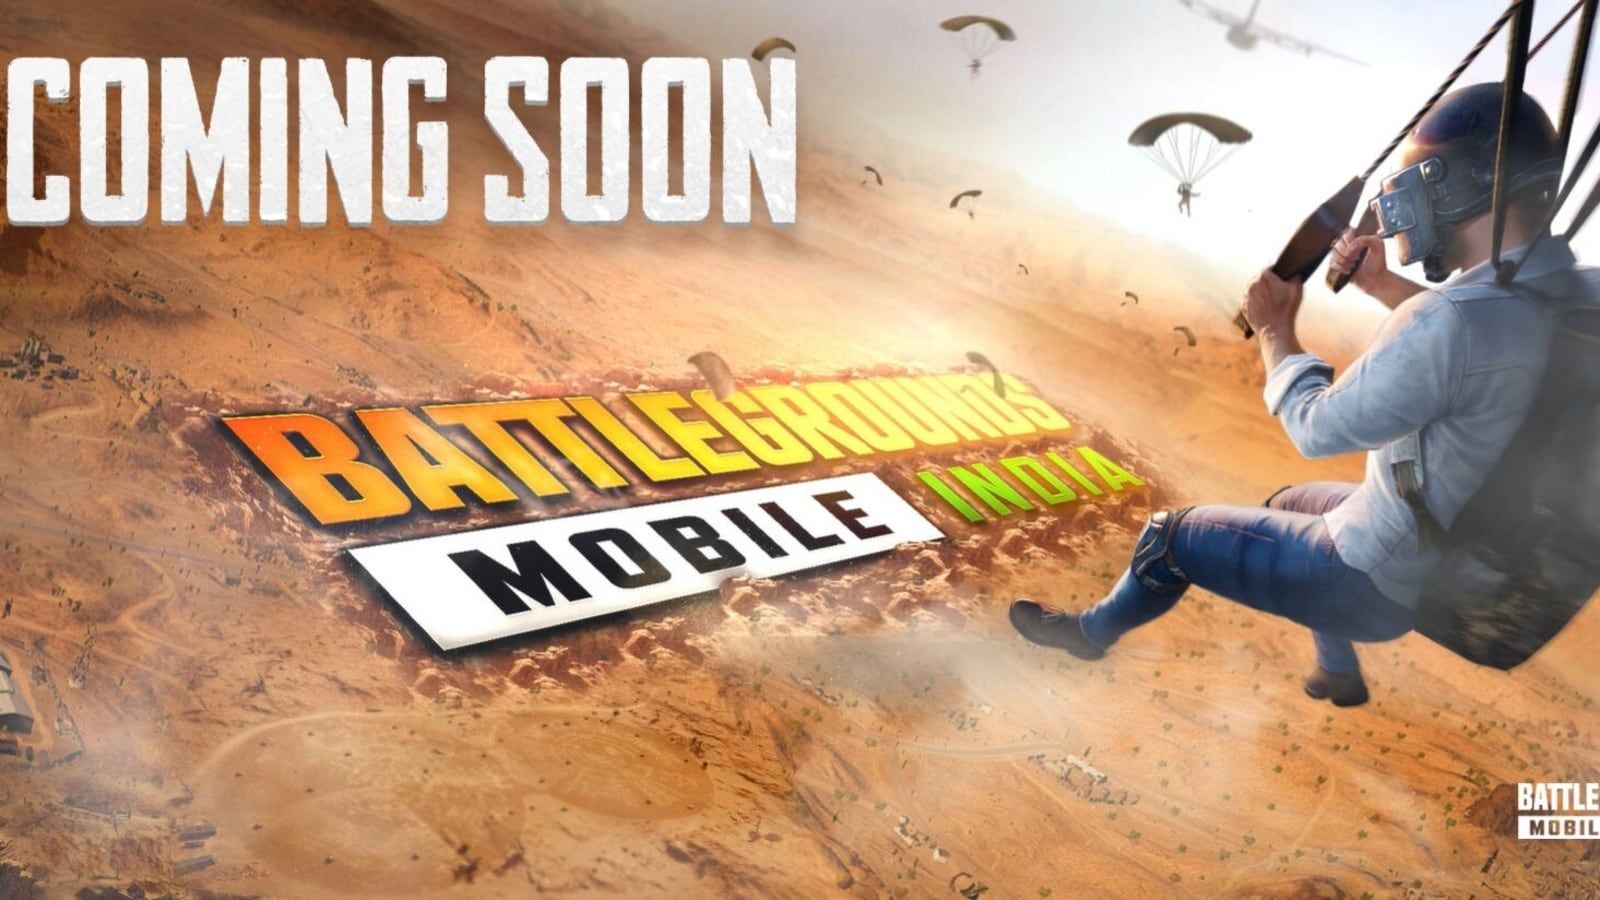 Battlegrounds Mobile India Download, Pre Registration Links Online Right Now Are All Fake, Do Not Click On Them